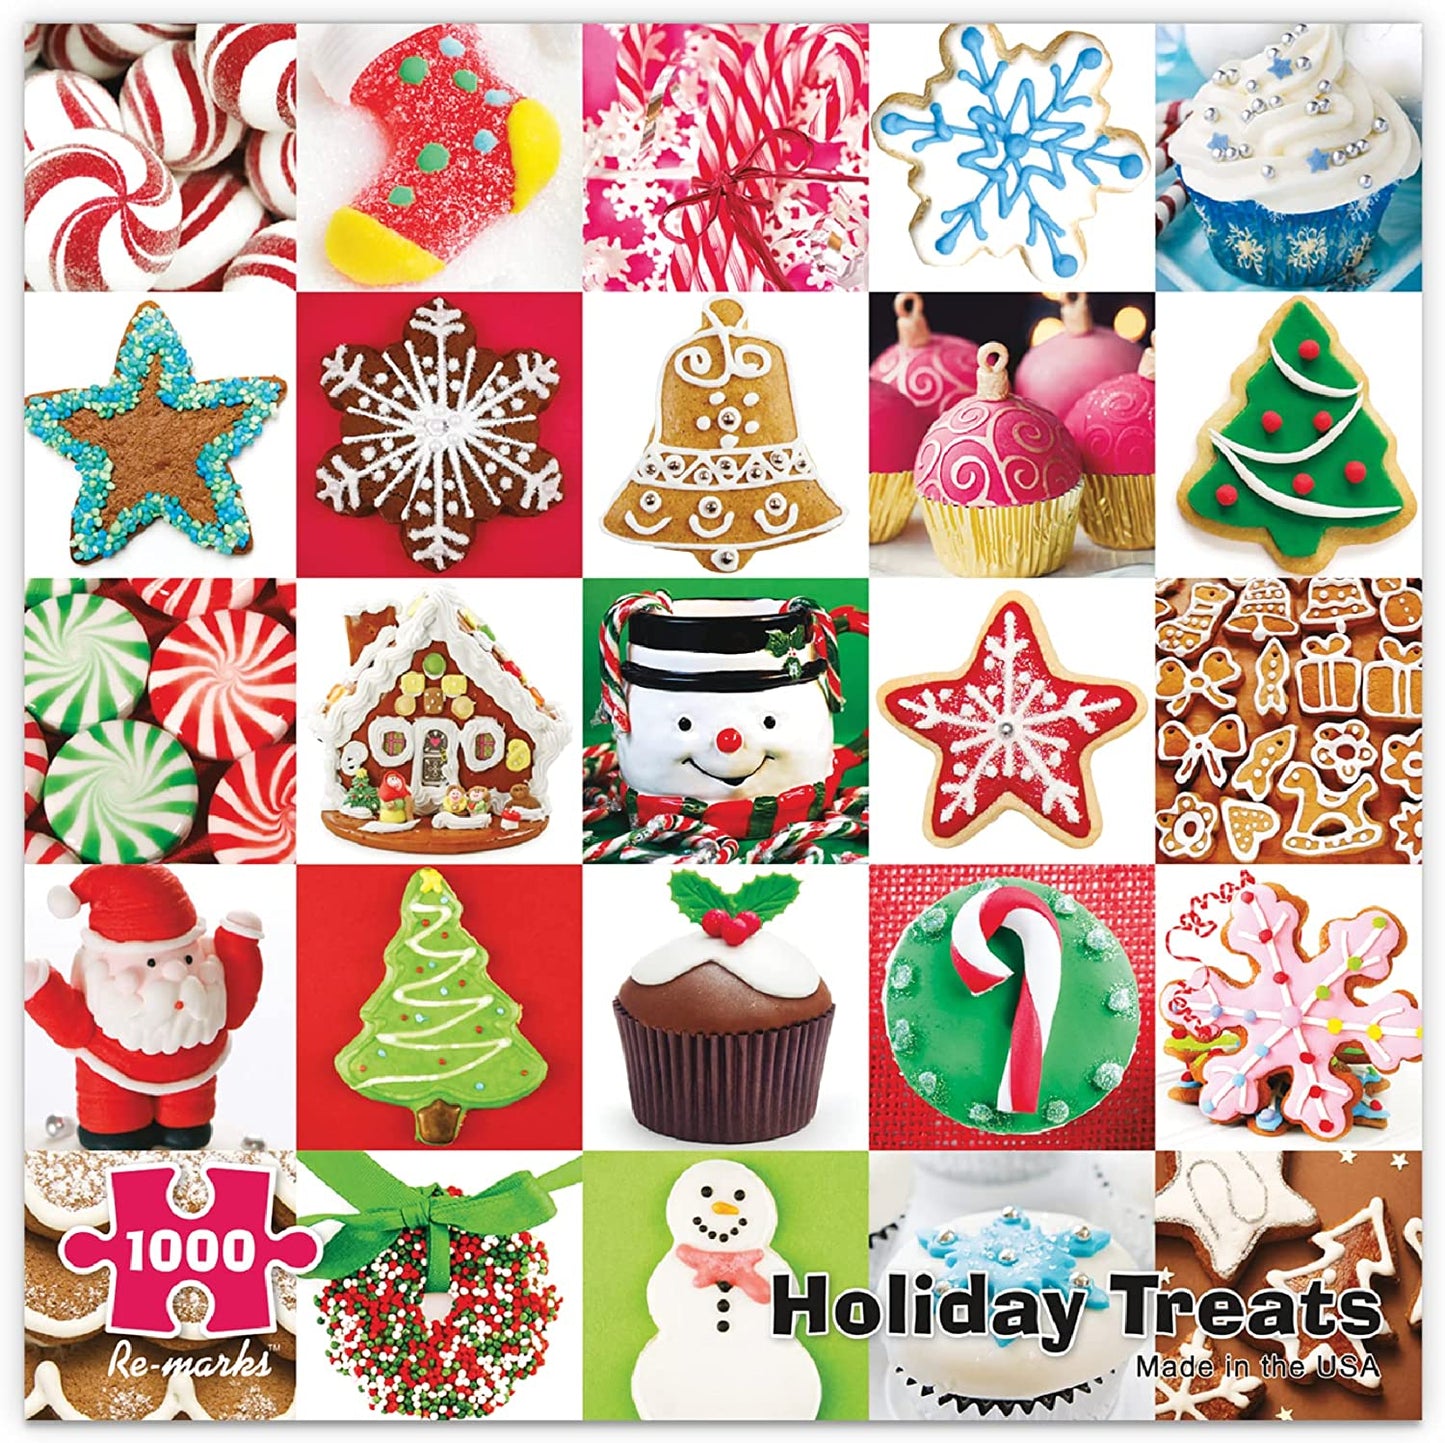 Holiday Treats Collage 1000-Piece Jigsaw Puzzle